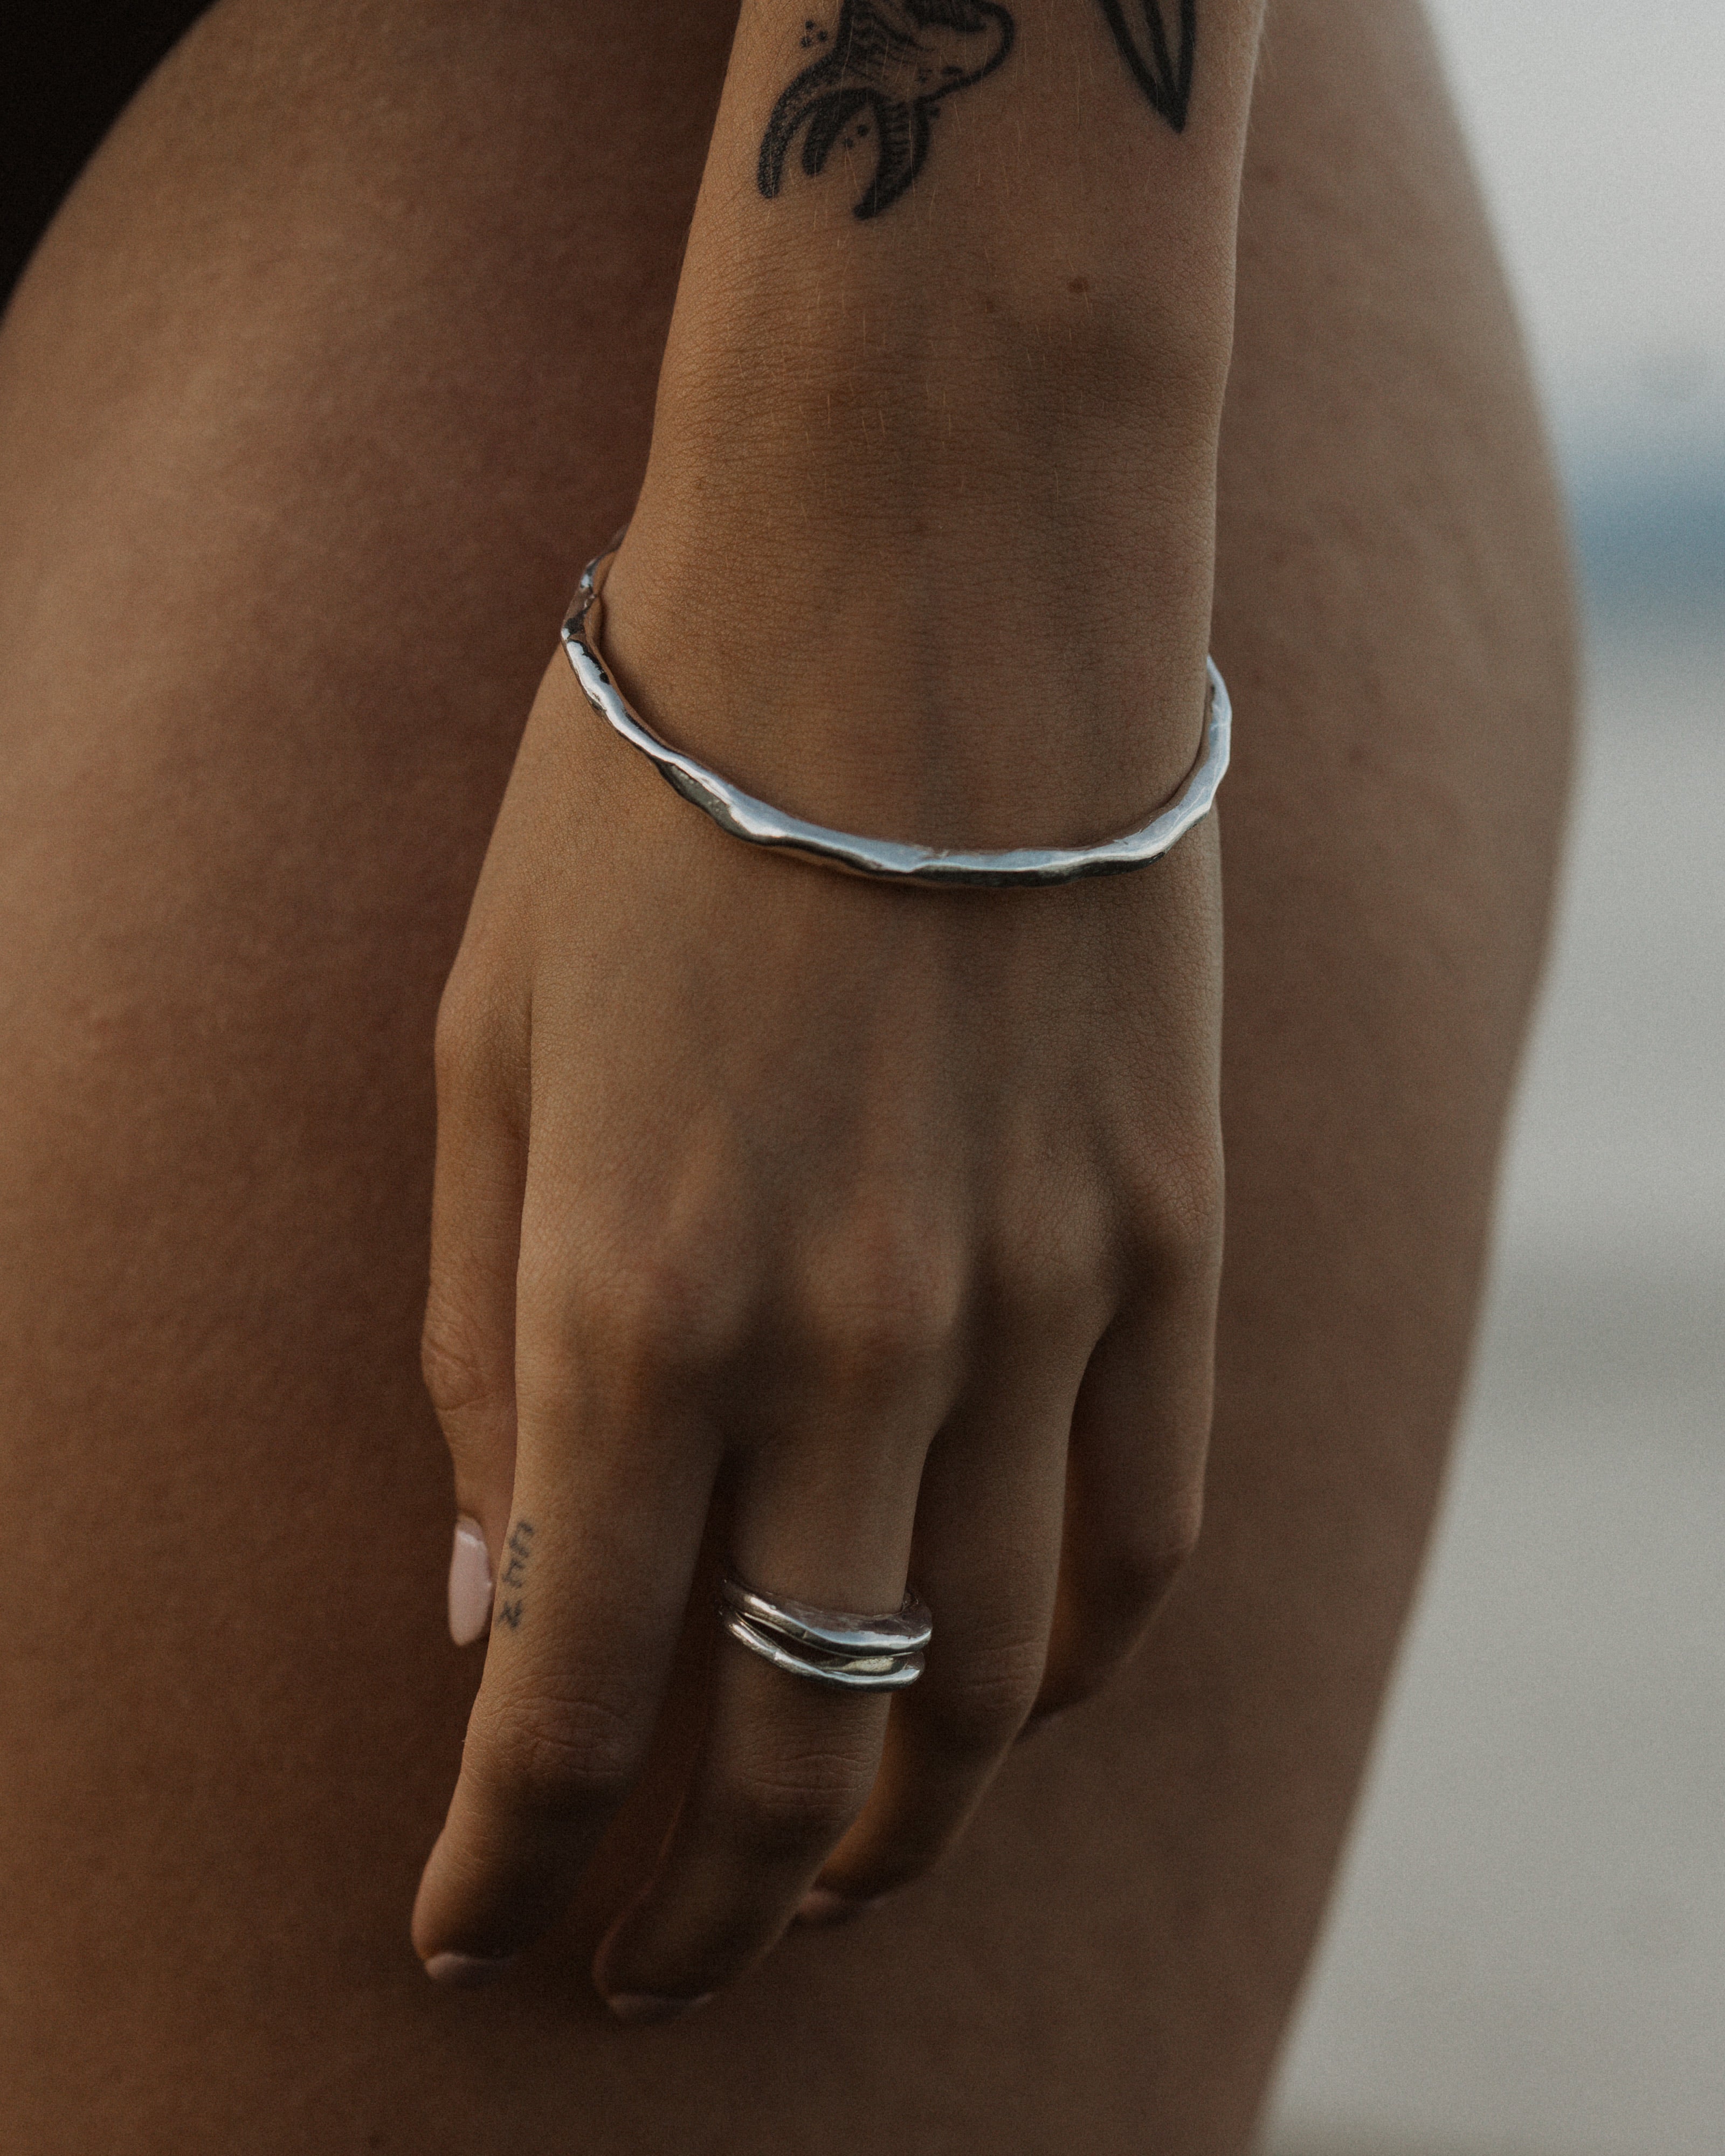 a close up of a hand and wrist wearing a stack of silver rings and a thick silver bracelet